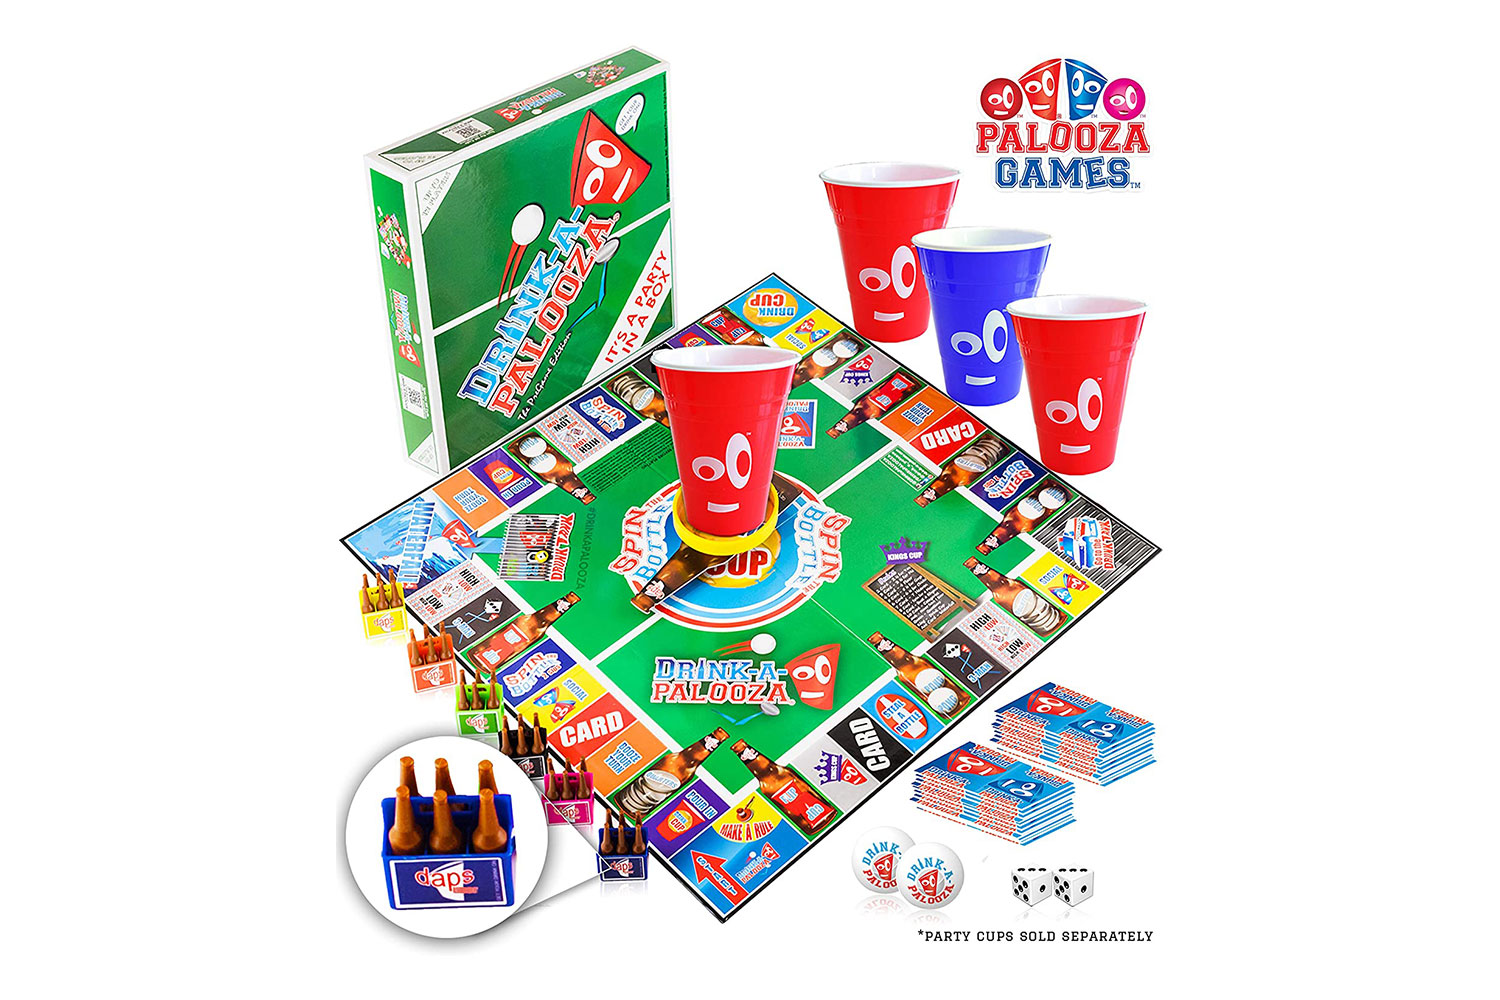 DRINK-A-PALOOZA Party Gifts for him Drinking Game Fun Board Games adult games 